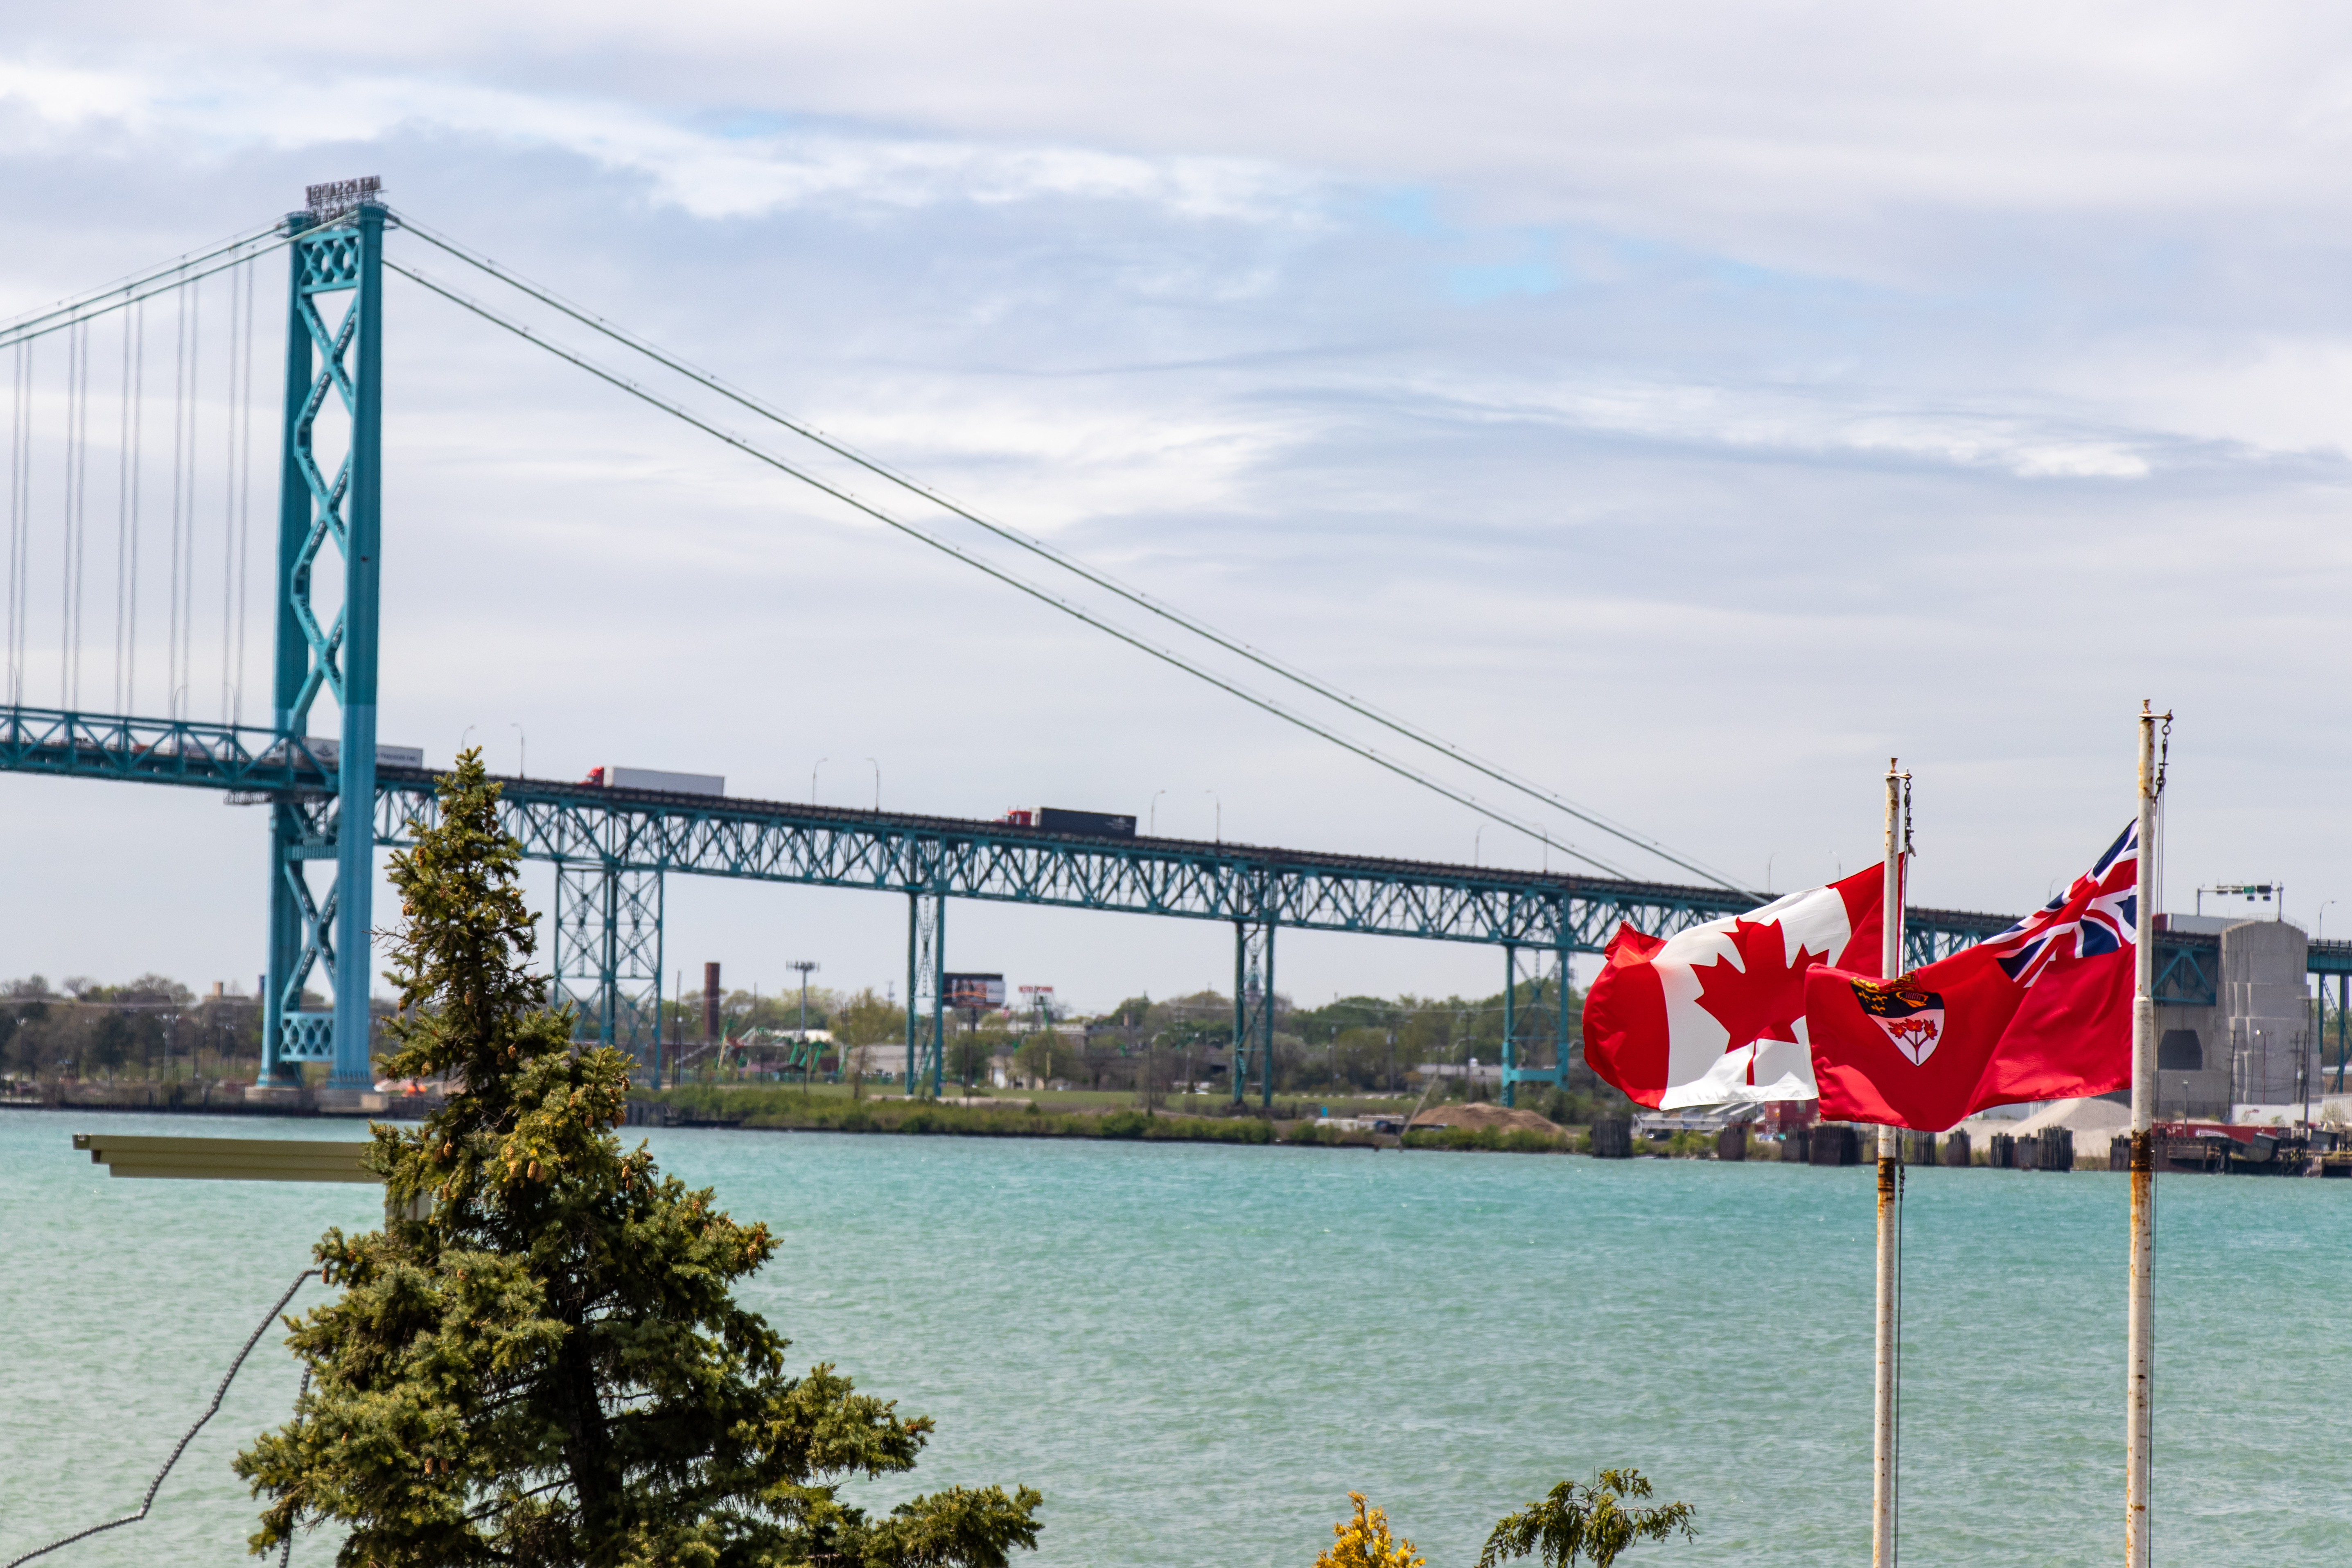 Windsor, Canada - May 21, 2020: Canada and Ontario flags seen waving in-front of the the US-Canada border, Ambassador Bridge crossing on sunny day.